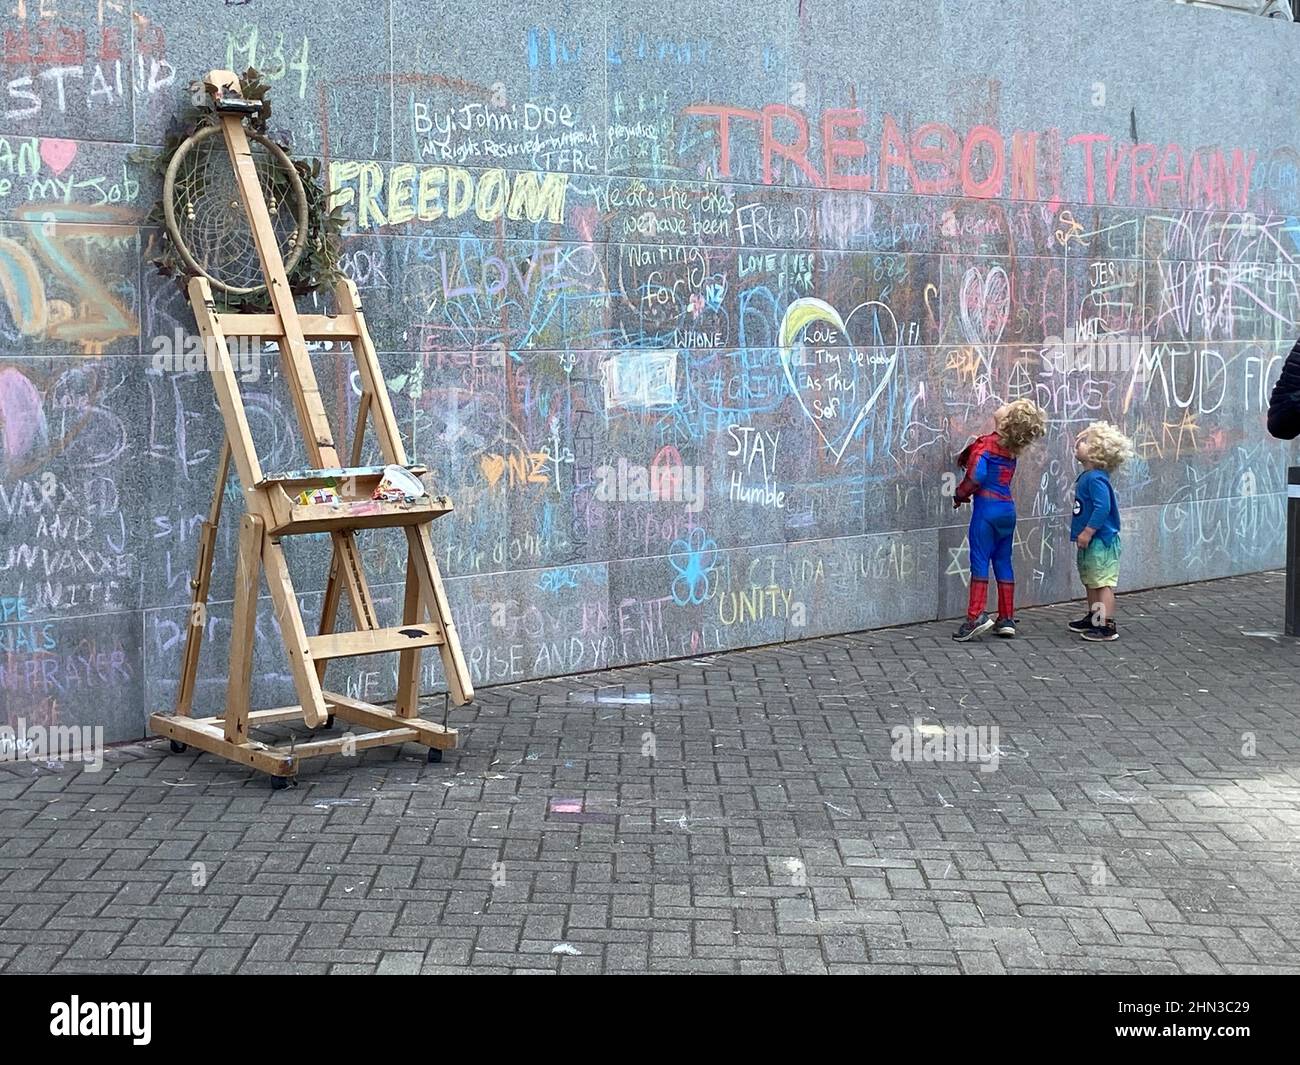 Children stand outside the parliament as protesters against the coronavirus disease (COVID-19) restrictions and vaccine mandates camp in front of it, in Wellington, New Zealand, February 14, 2022. REUTERS/Praveen Menon Stock Photo